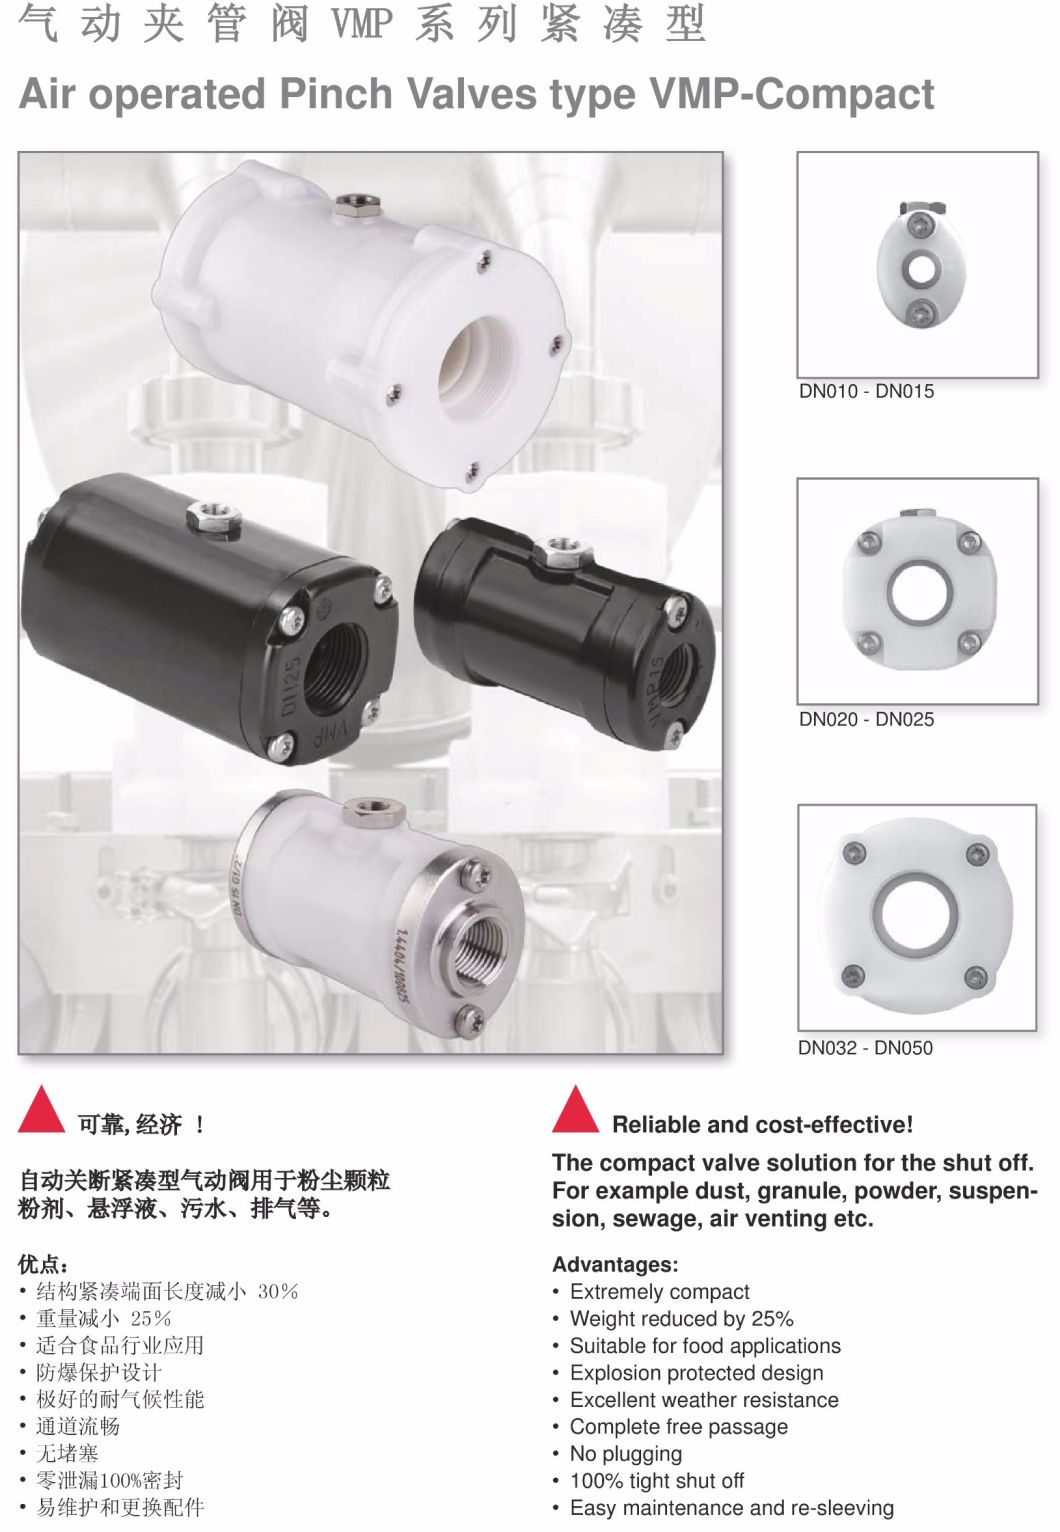 Chinese Wenzhou Supplier Vmp Air Operated Pneumatic Pinch Valve